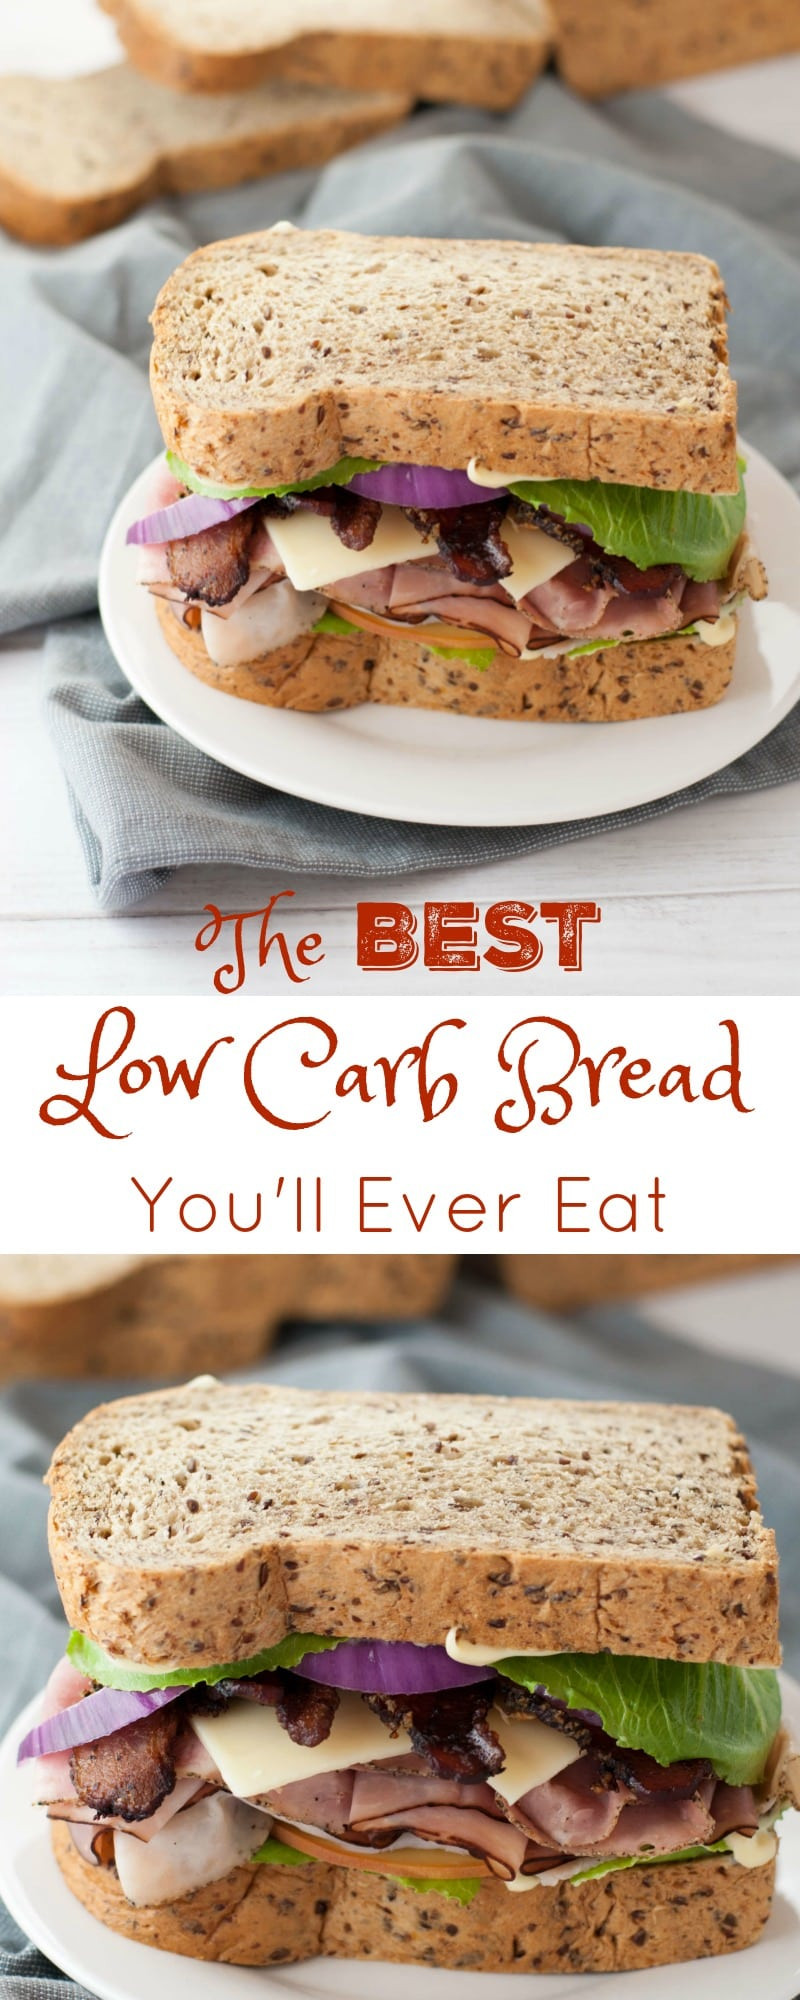 Best Low Carb Bread
 The Best Low Carb Bread You Will Ever Eat